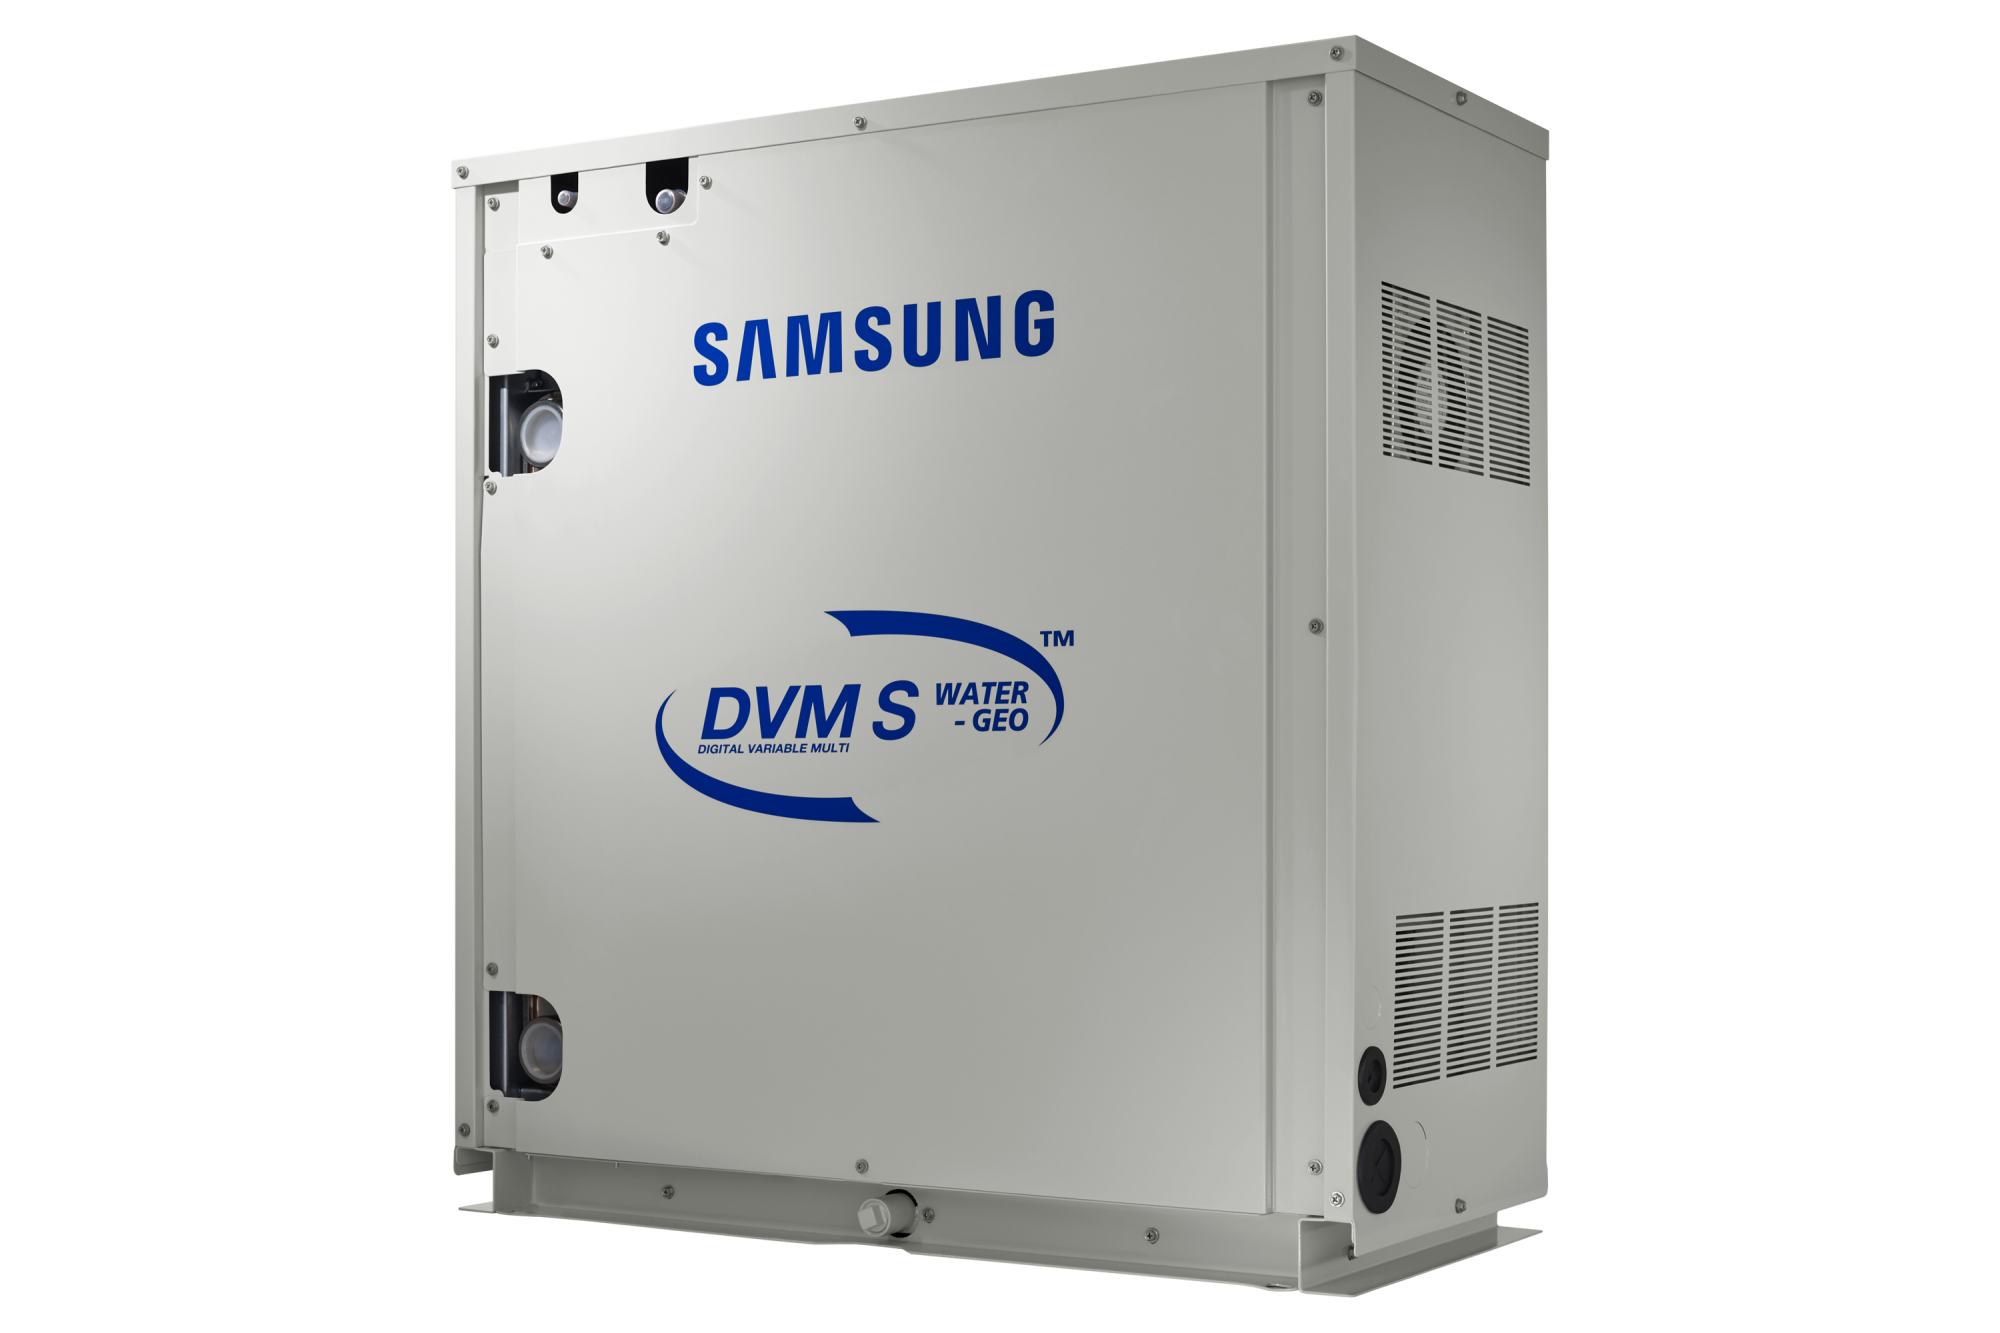 Samsung AM048KXWDCH/AA Air Conditioner DVM S Series, Water Condensing Unit